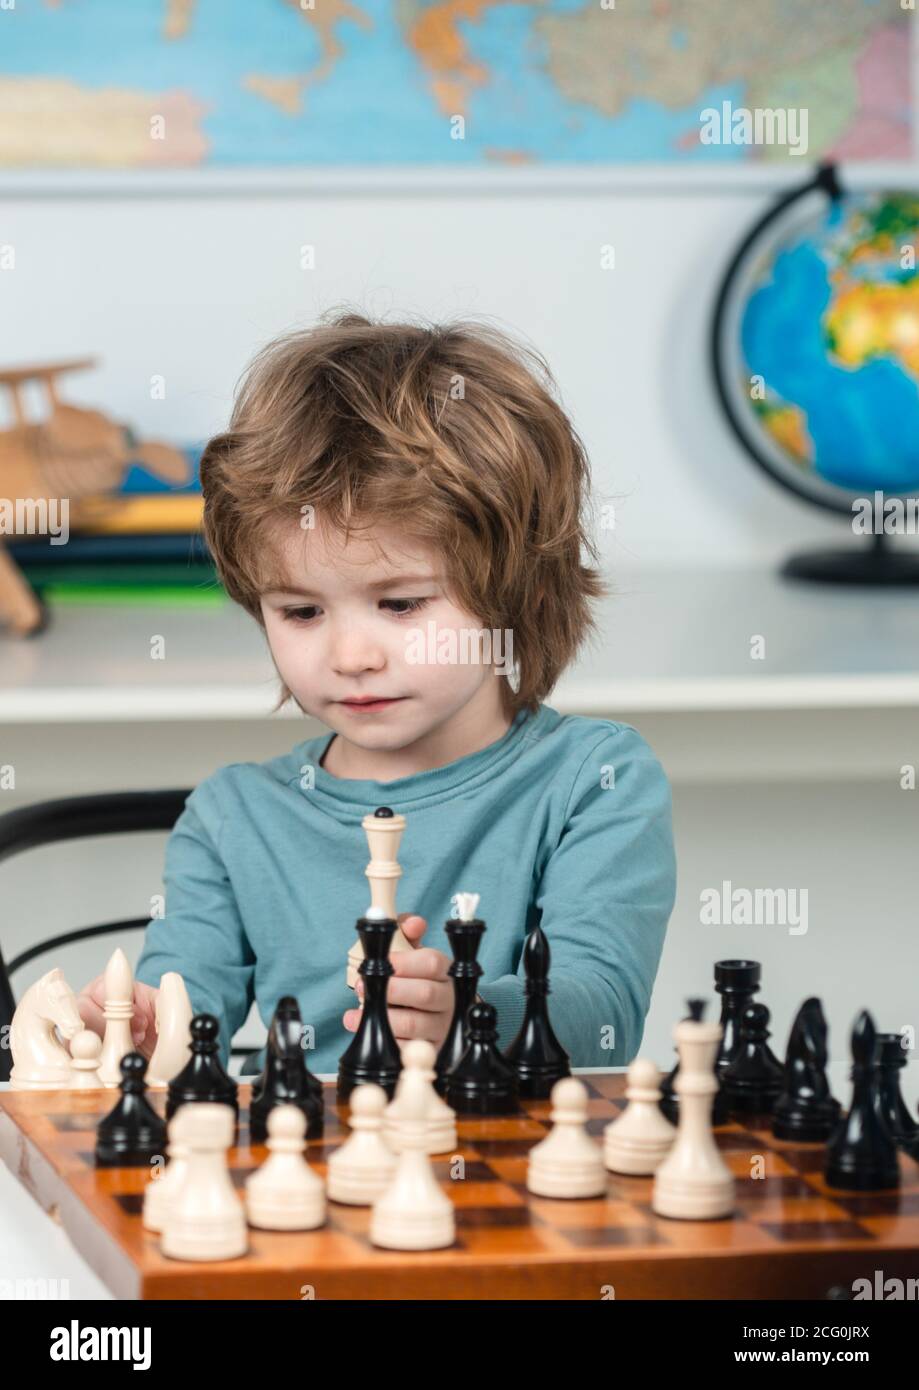 Kids chess school. Concentrated boy developing chess strategy, playing board game. Stock Photo